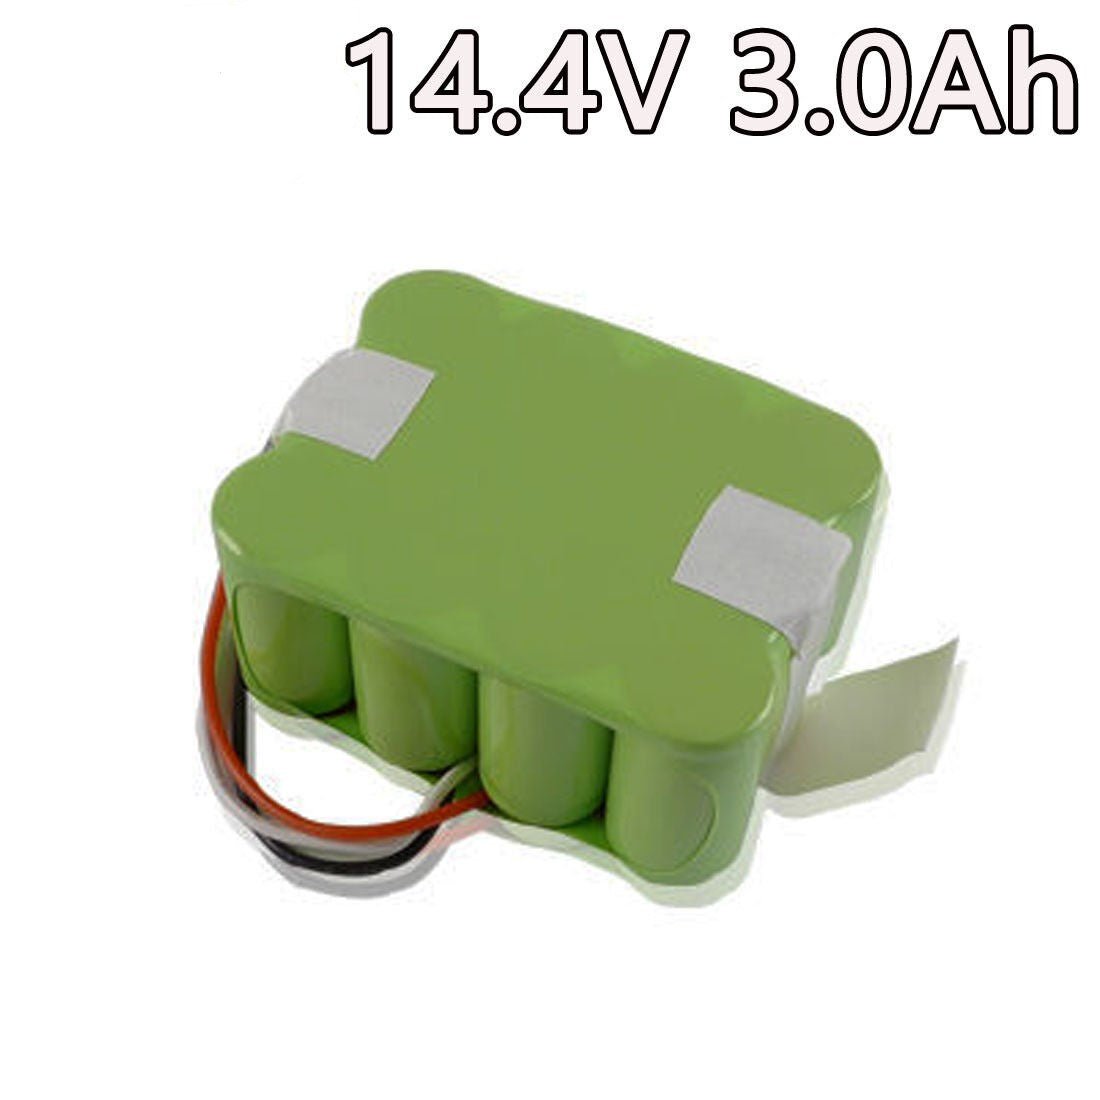 Raplacement Battery 14.4V 3.0Ah for Russell Hobbs KV8 9240 XR510F Robot Vacuum Cleaner - Office Catch